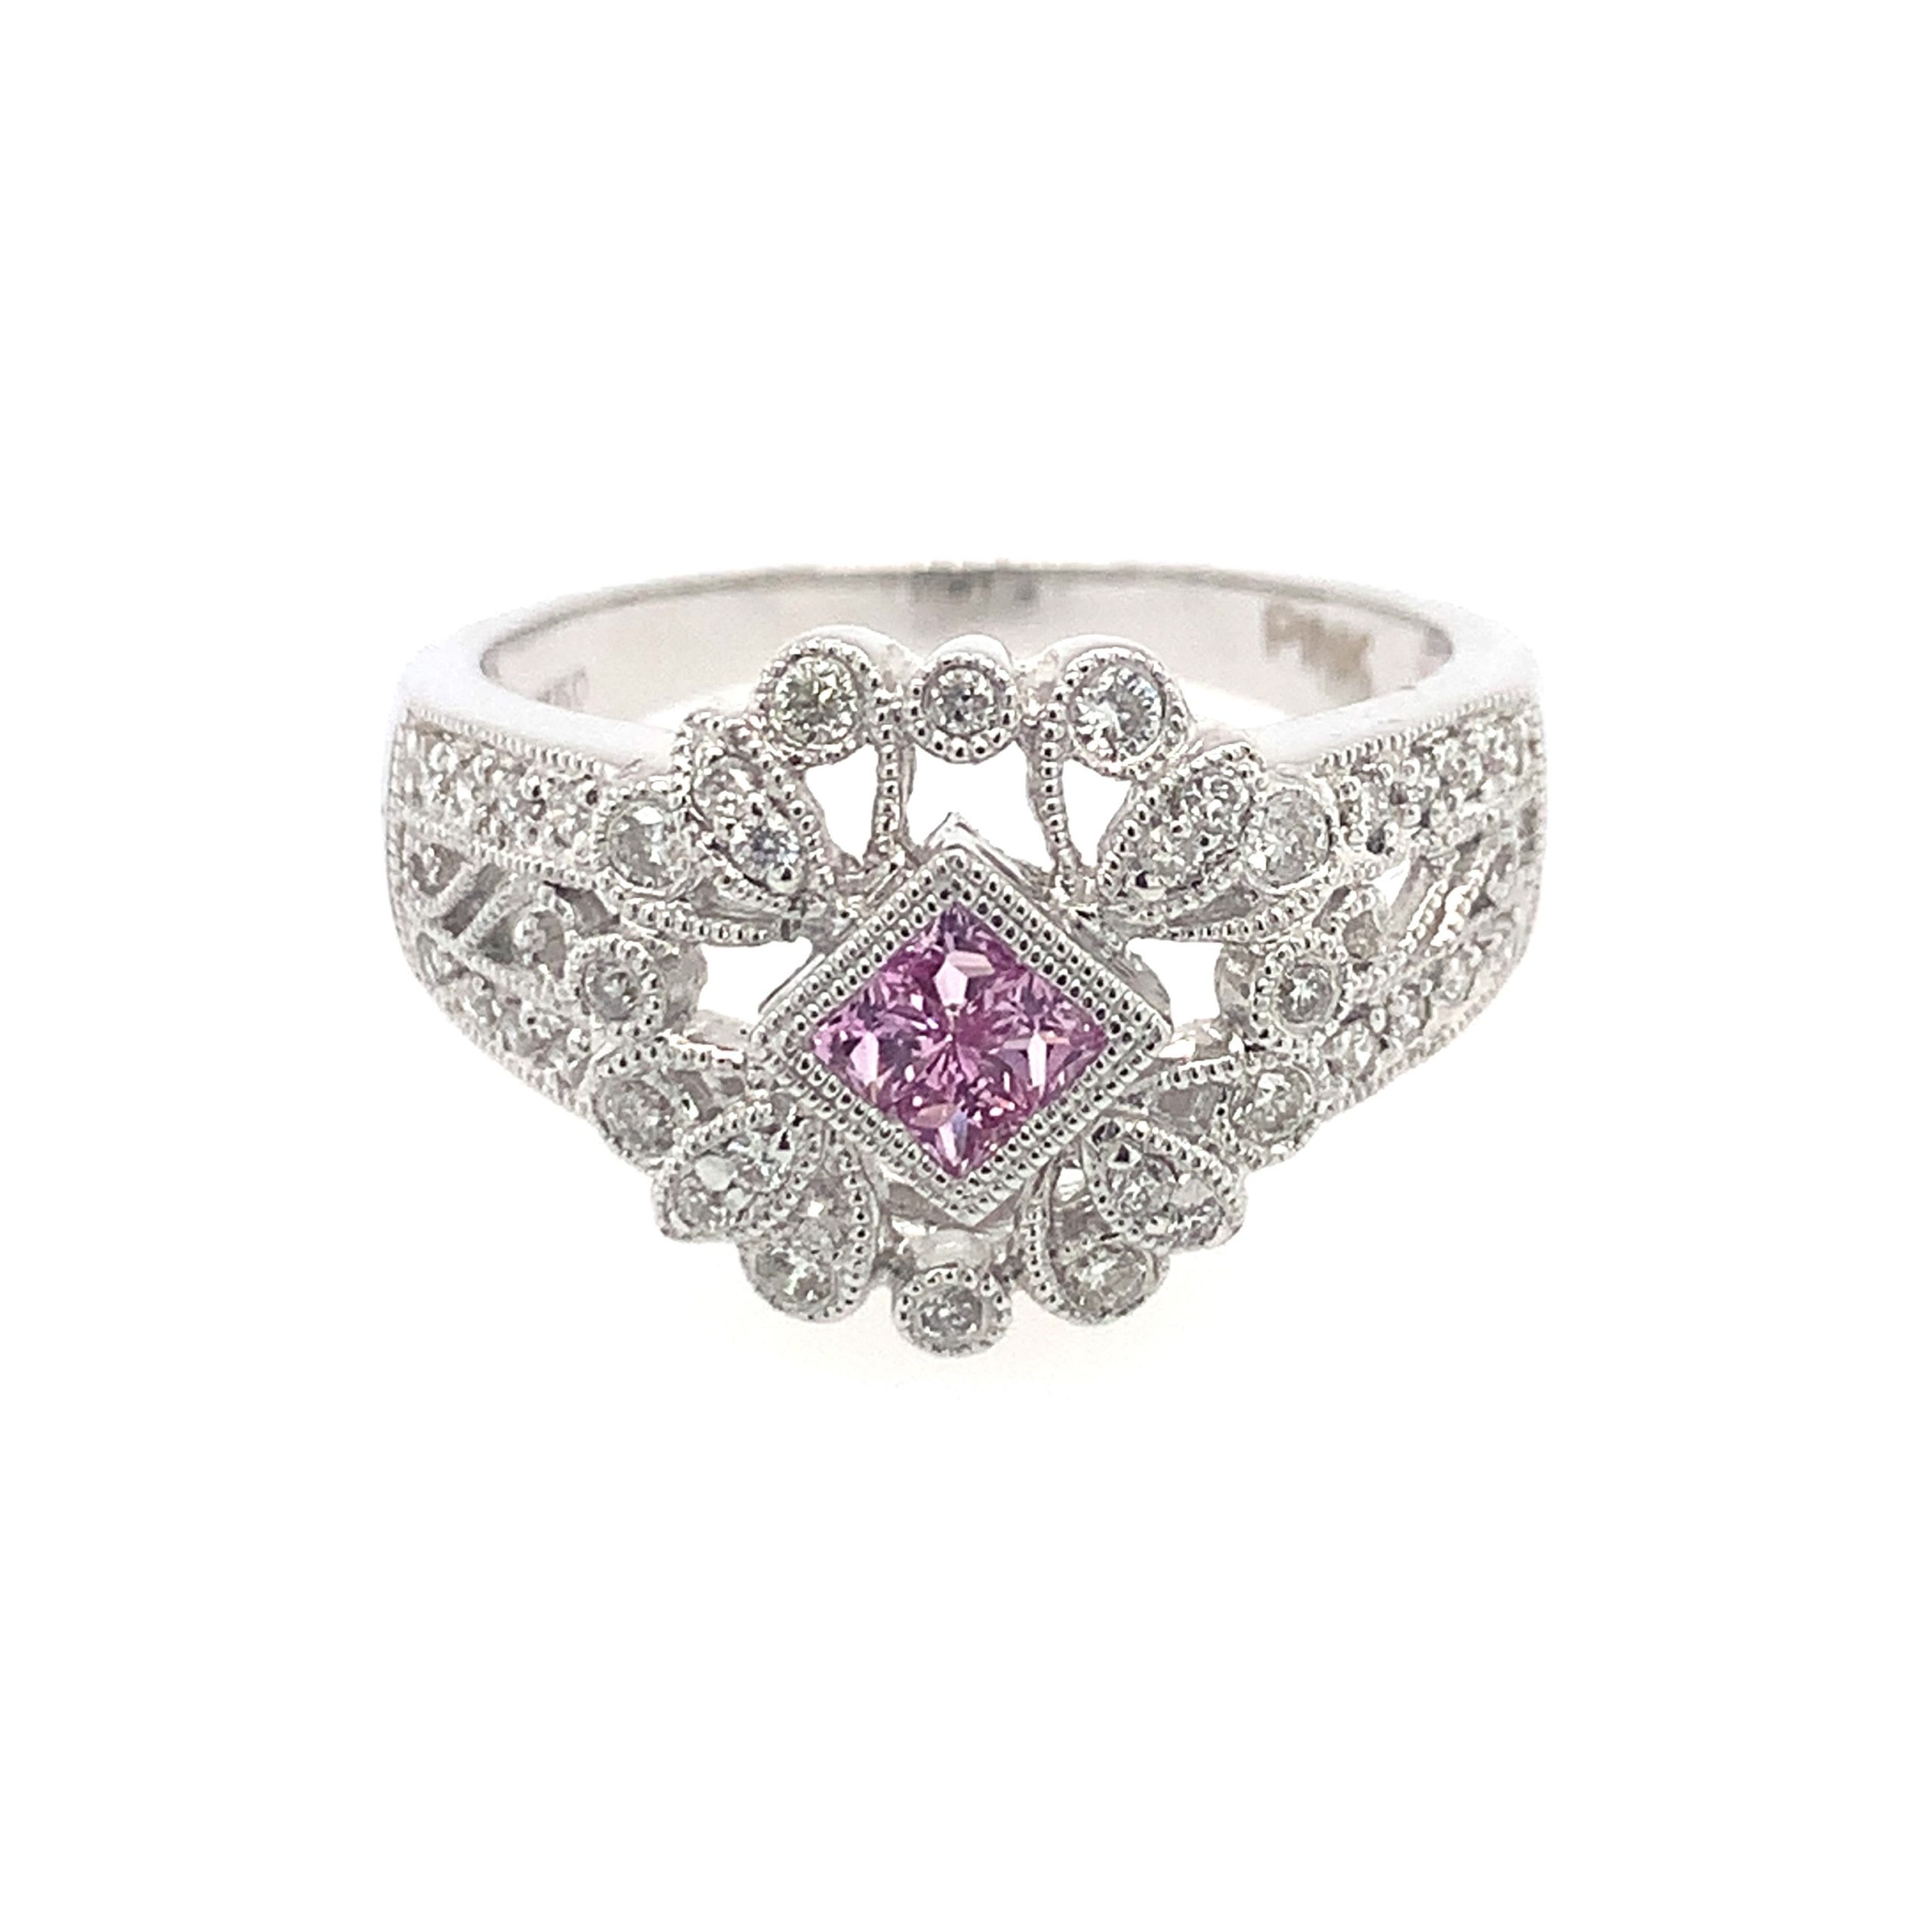 White Gold Antique-Inspired Pink Sapphire Ring